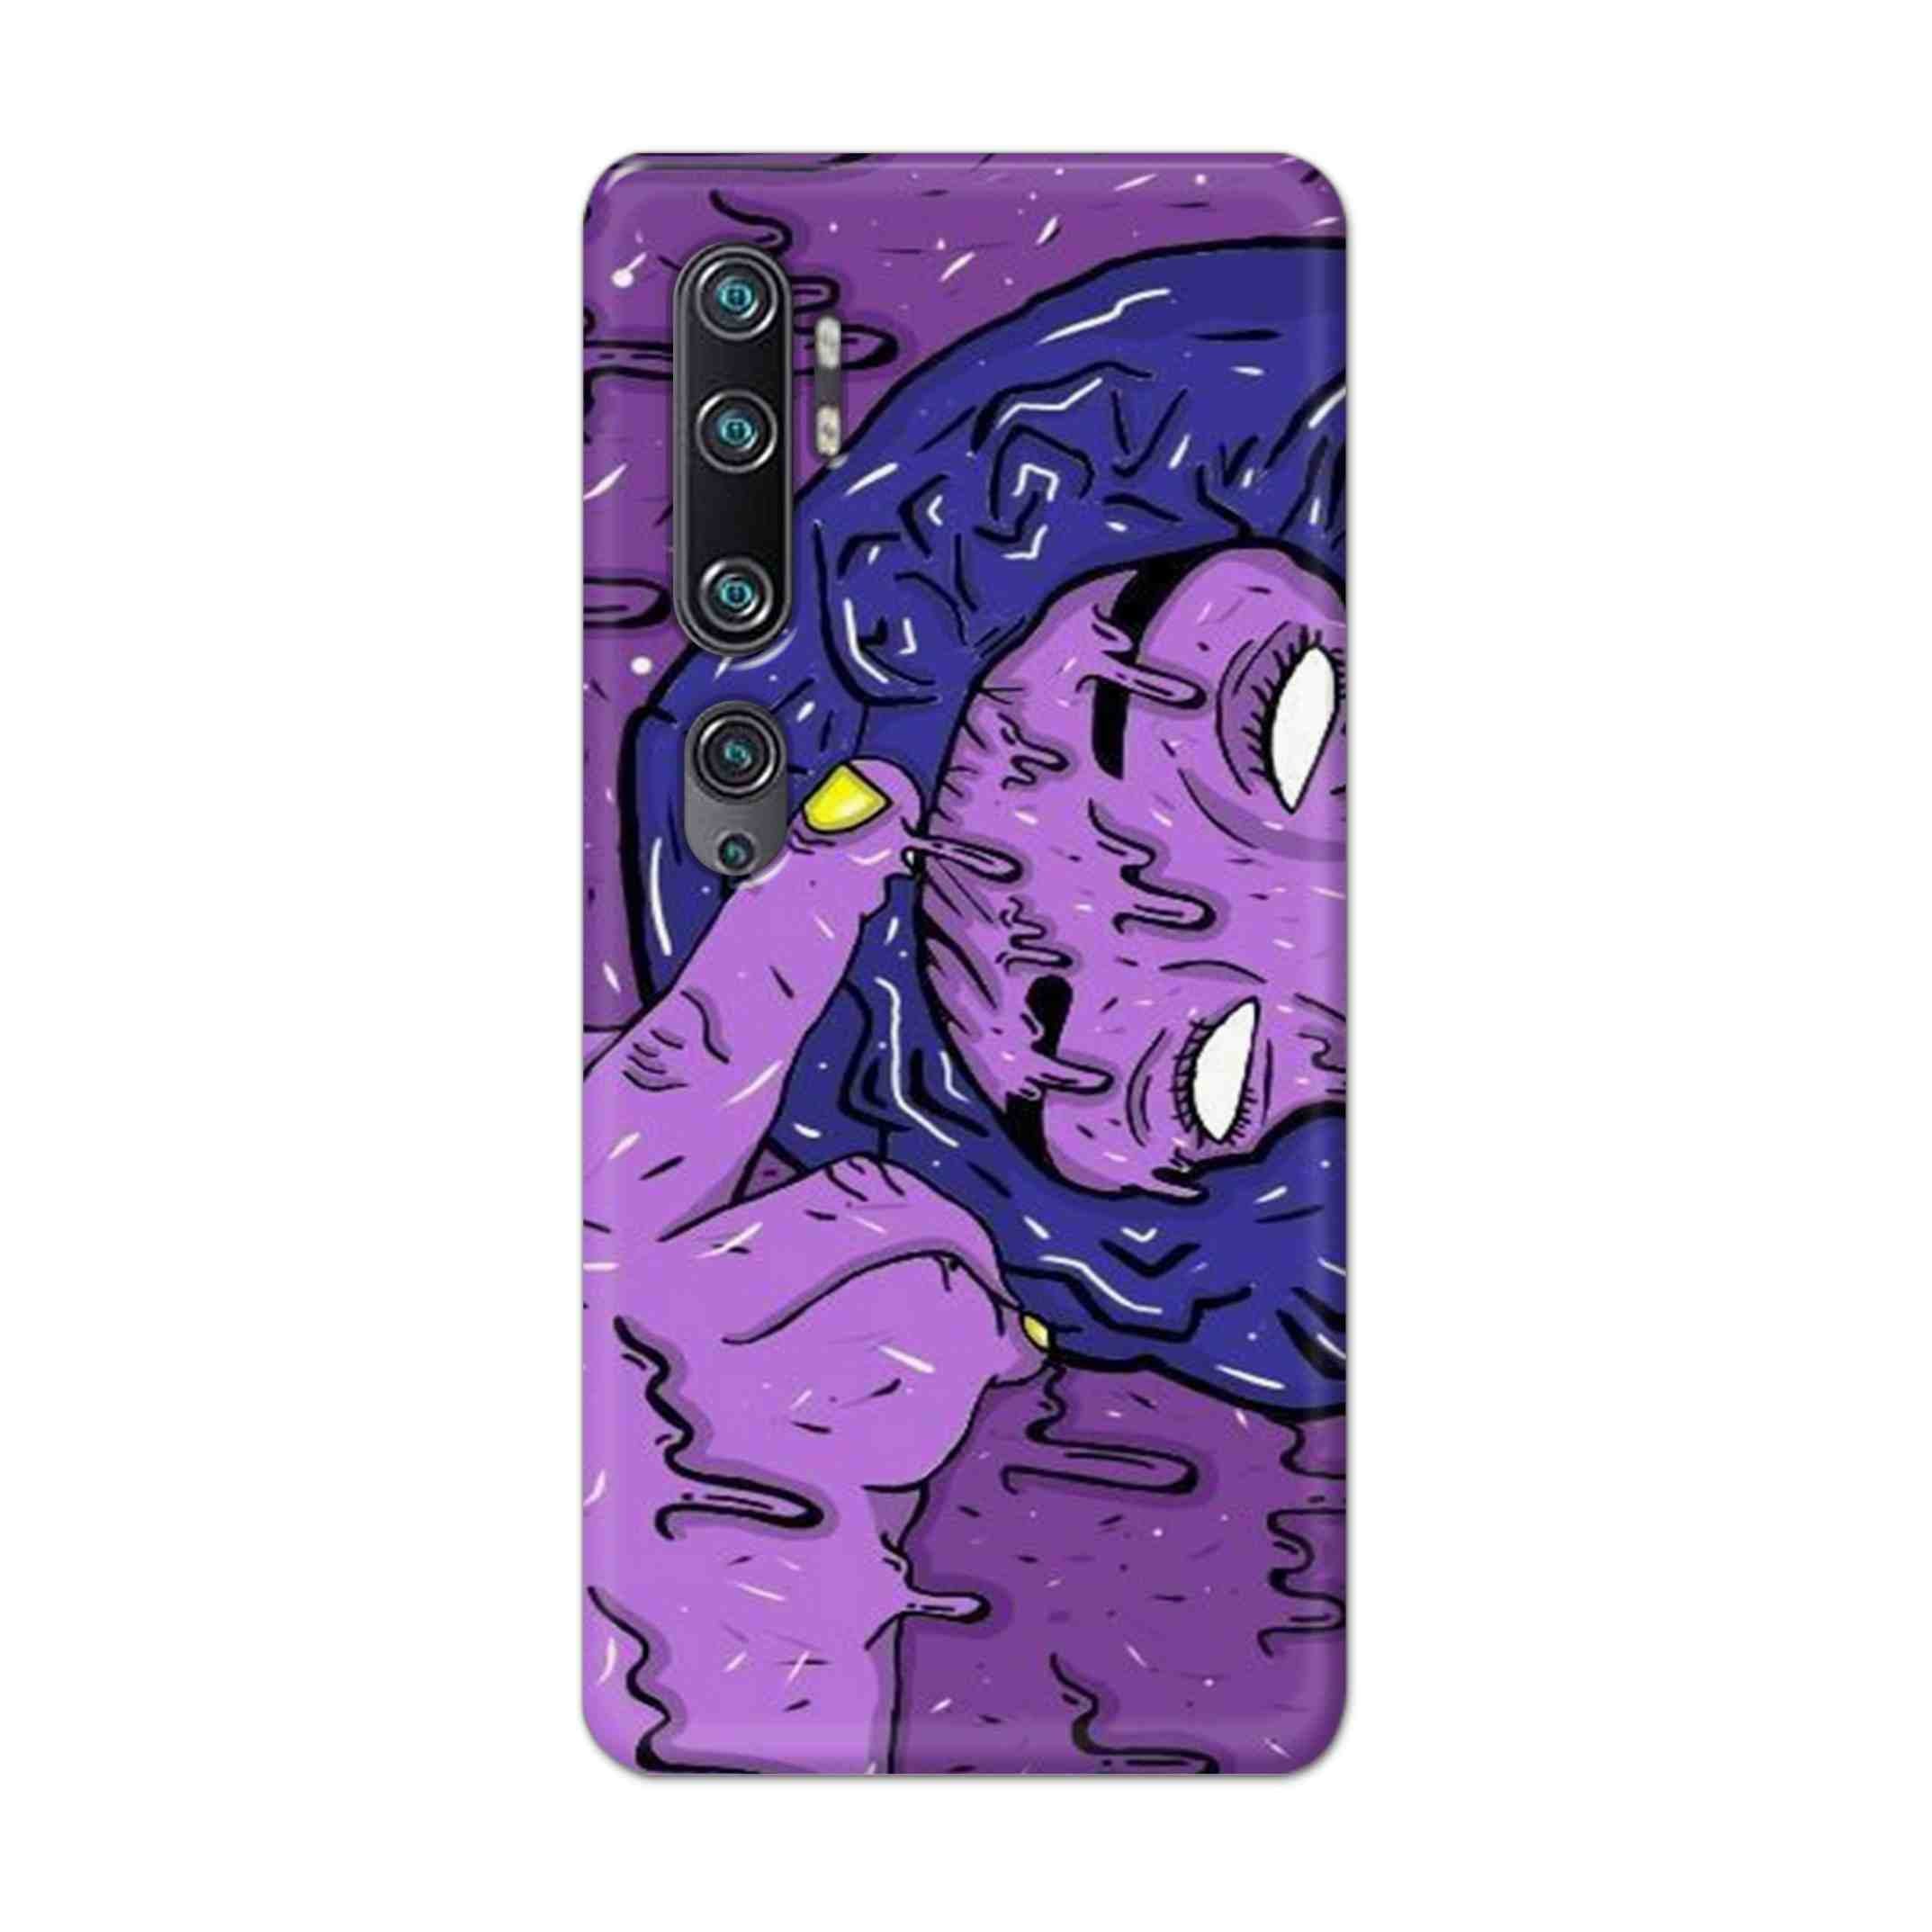 Buy Dashing Art Hard Back Mobile Phone Case Cover For Xiaomi Mi Note 10 Online